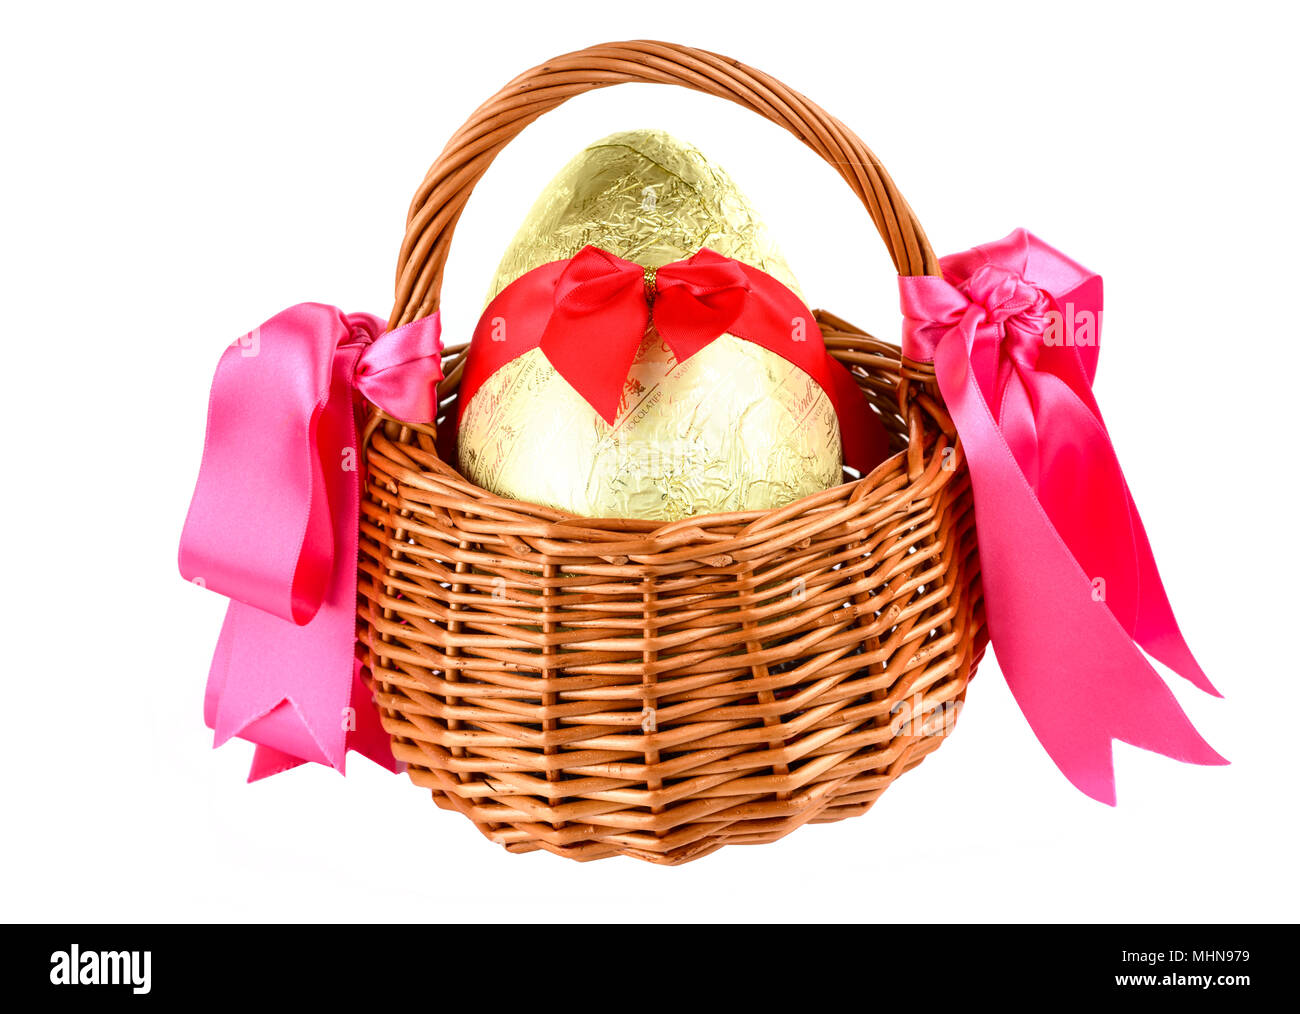 Wrapped chocolate easter egg with bow ina wicker basket Stock Photo